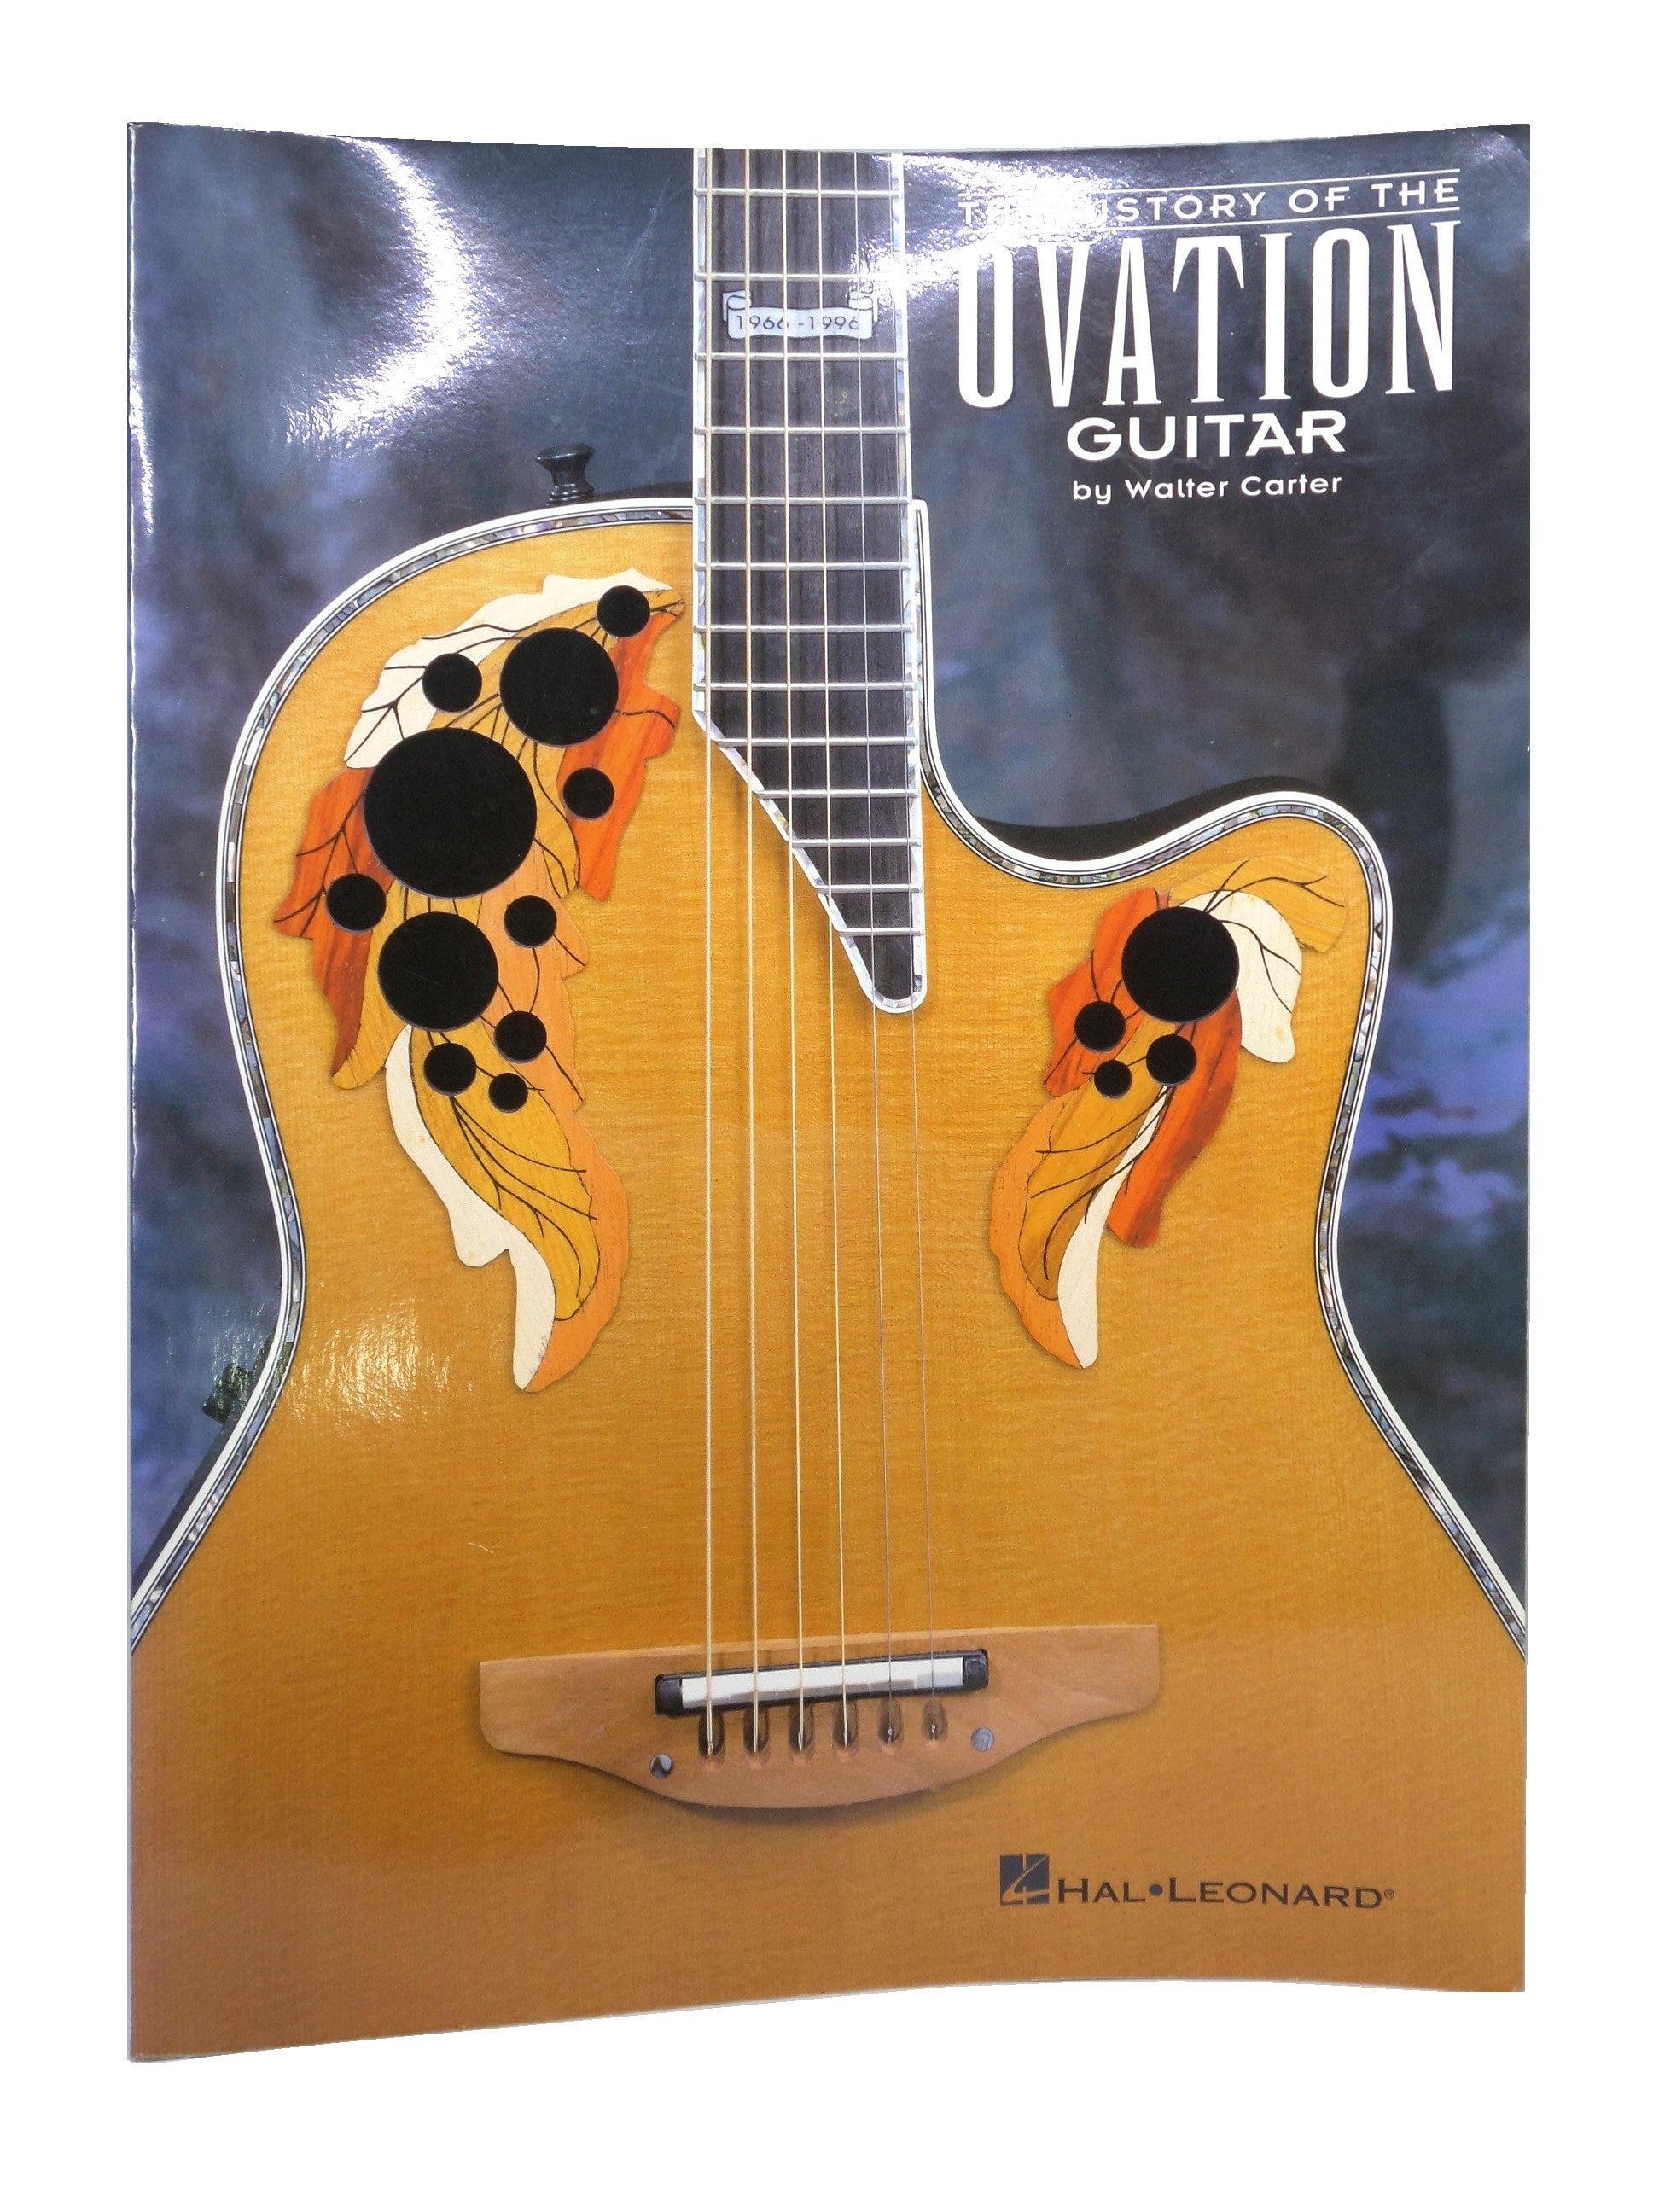 THE HISTORY OF THE OVATION GUITAR BY WALTER CARTER 1996 FIRST EDITION PAPERBACK